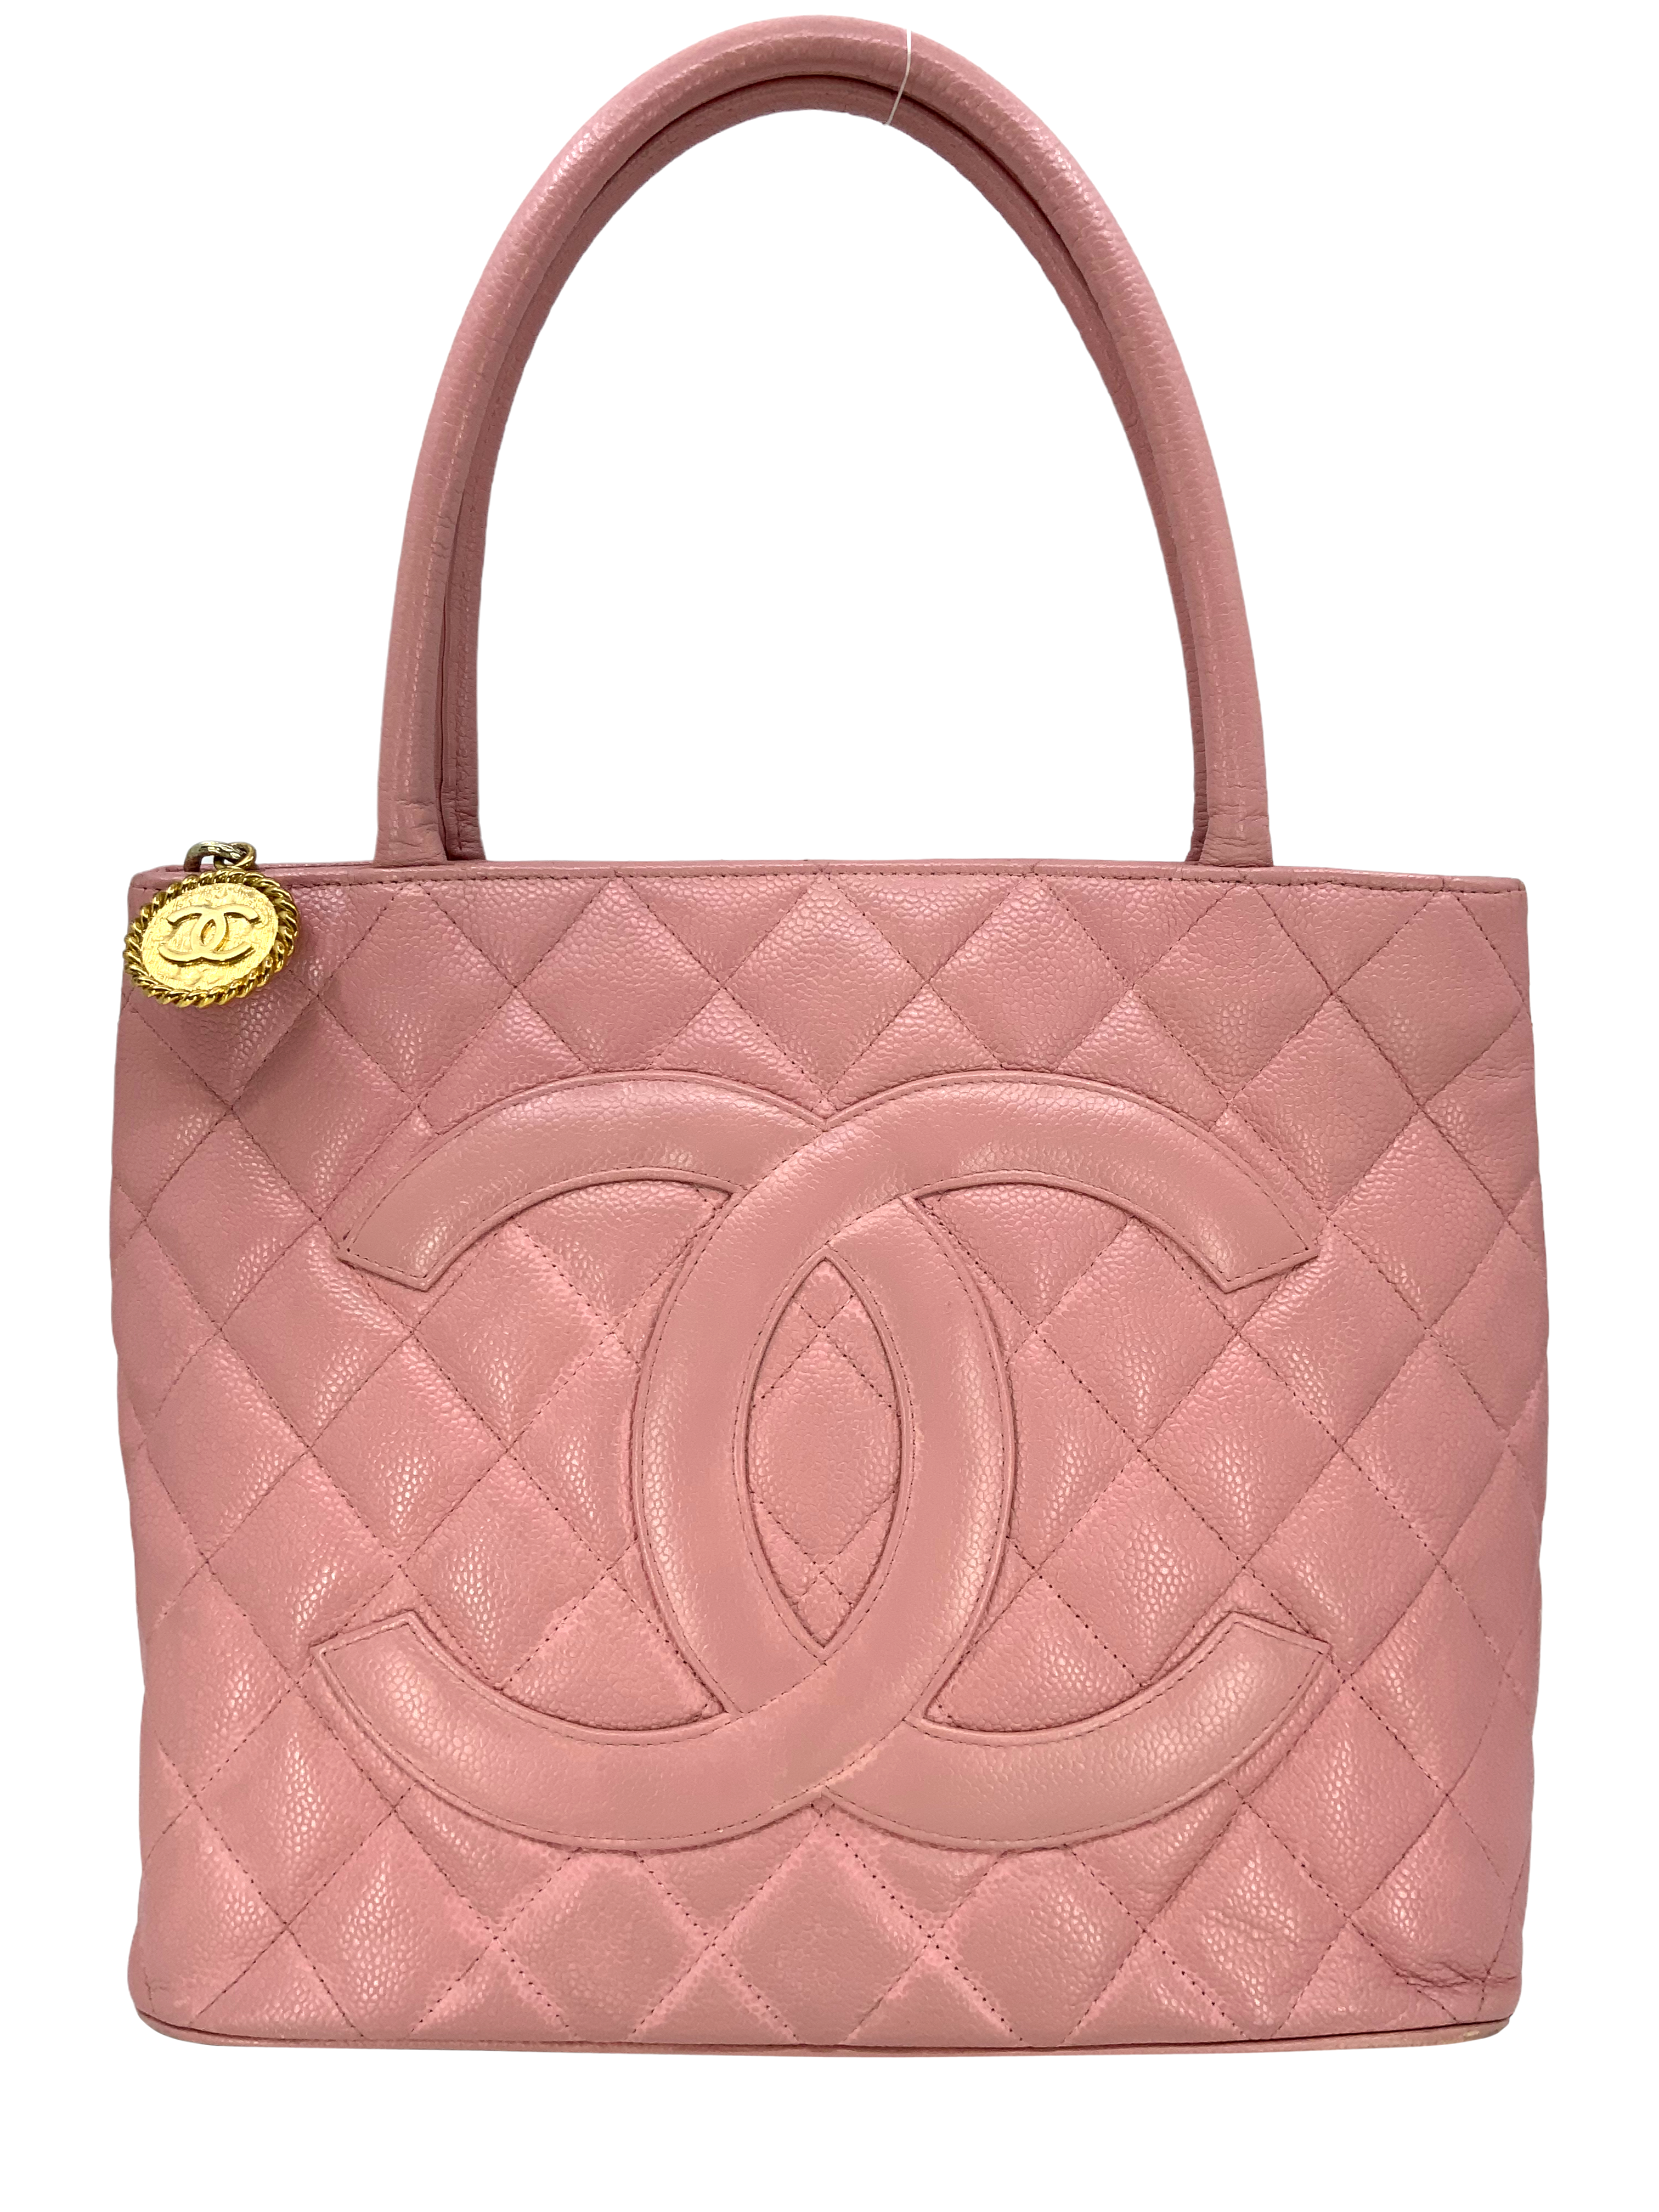 chanel quilted tote bag leather